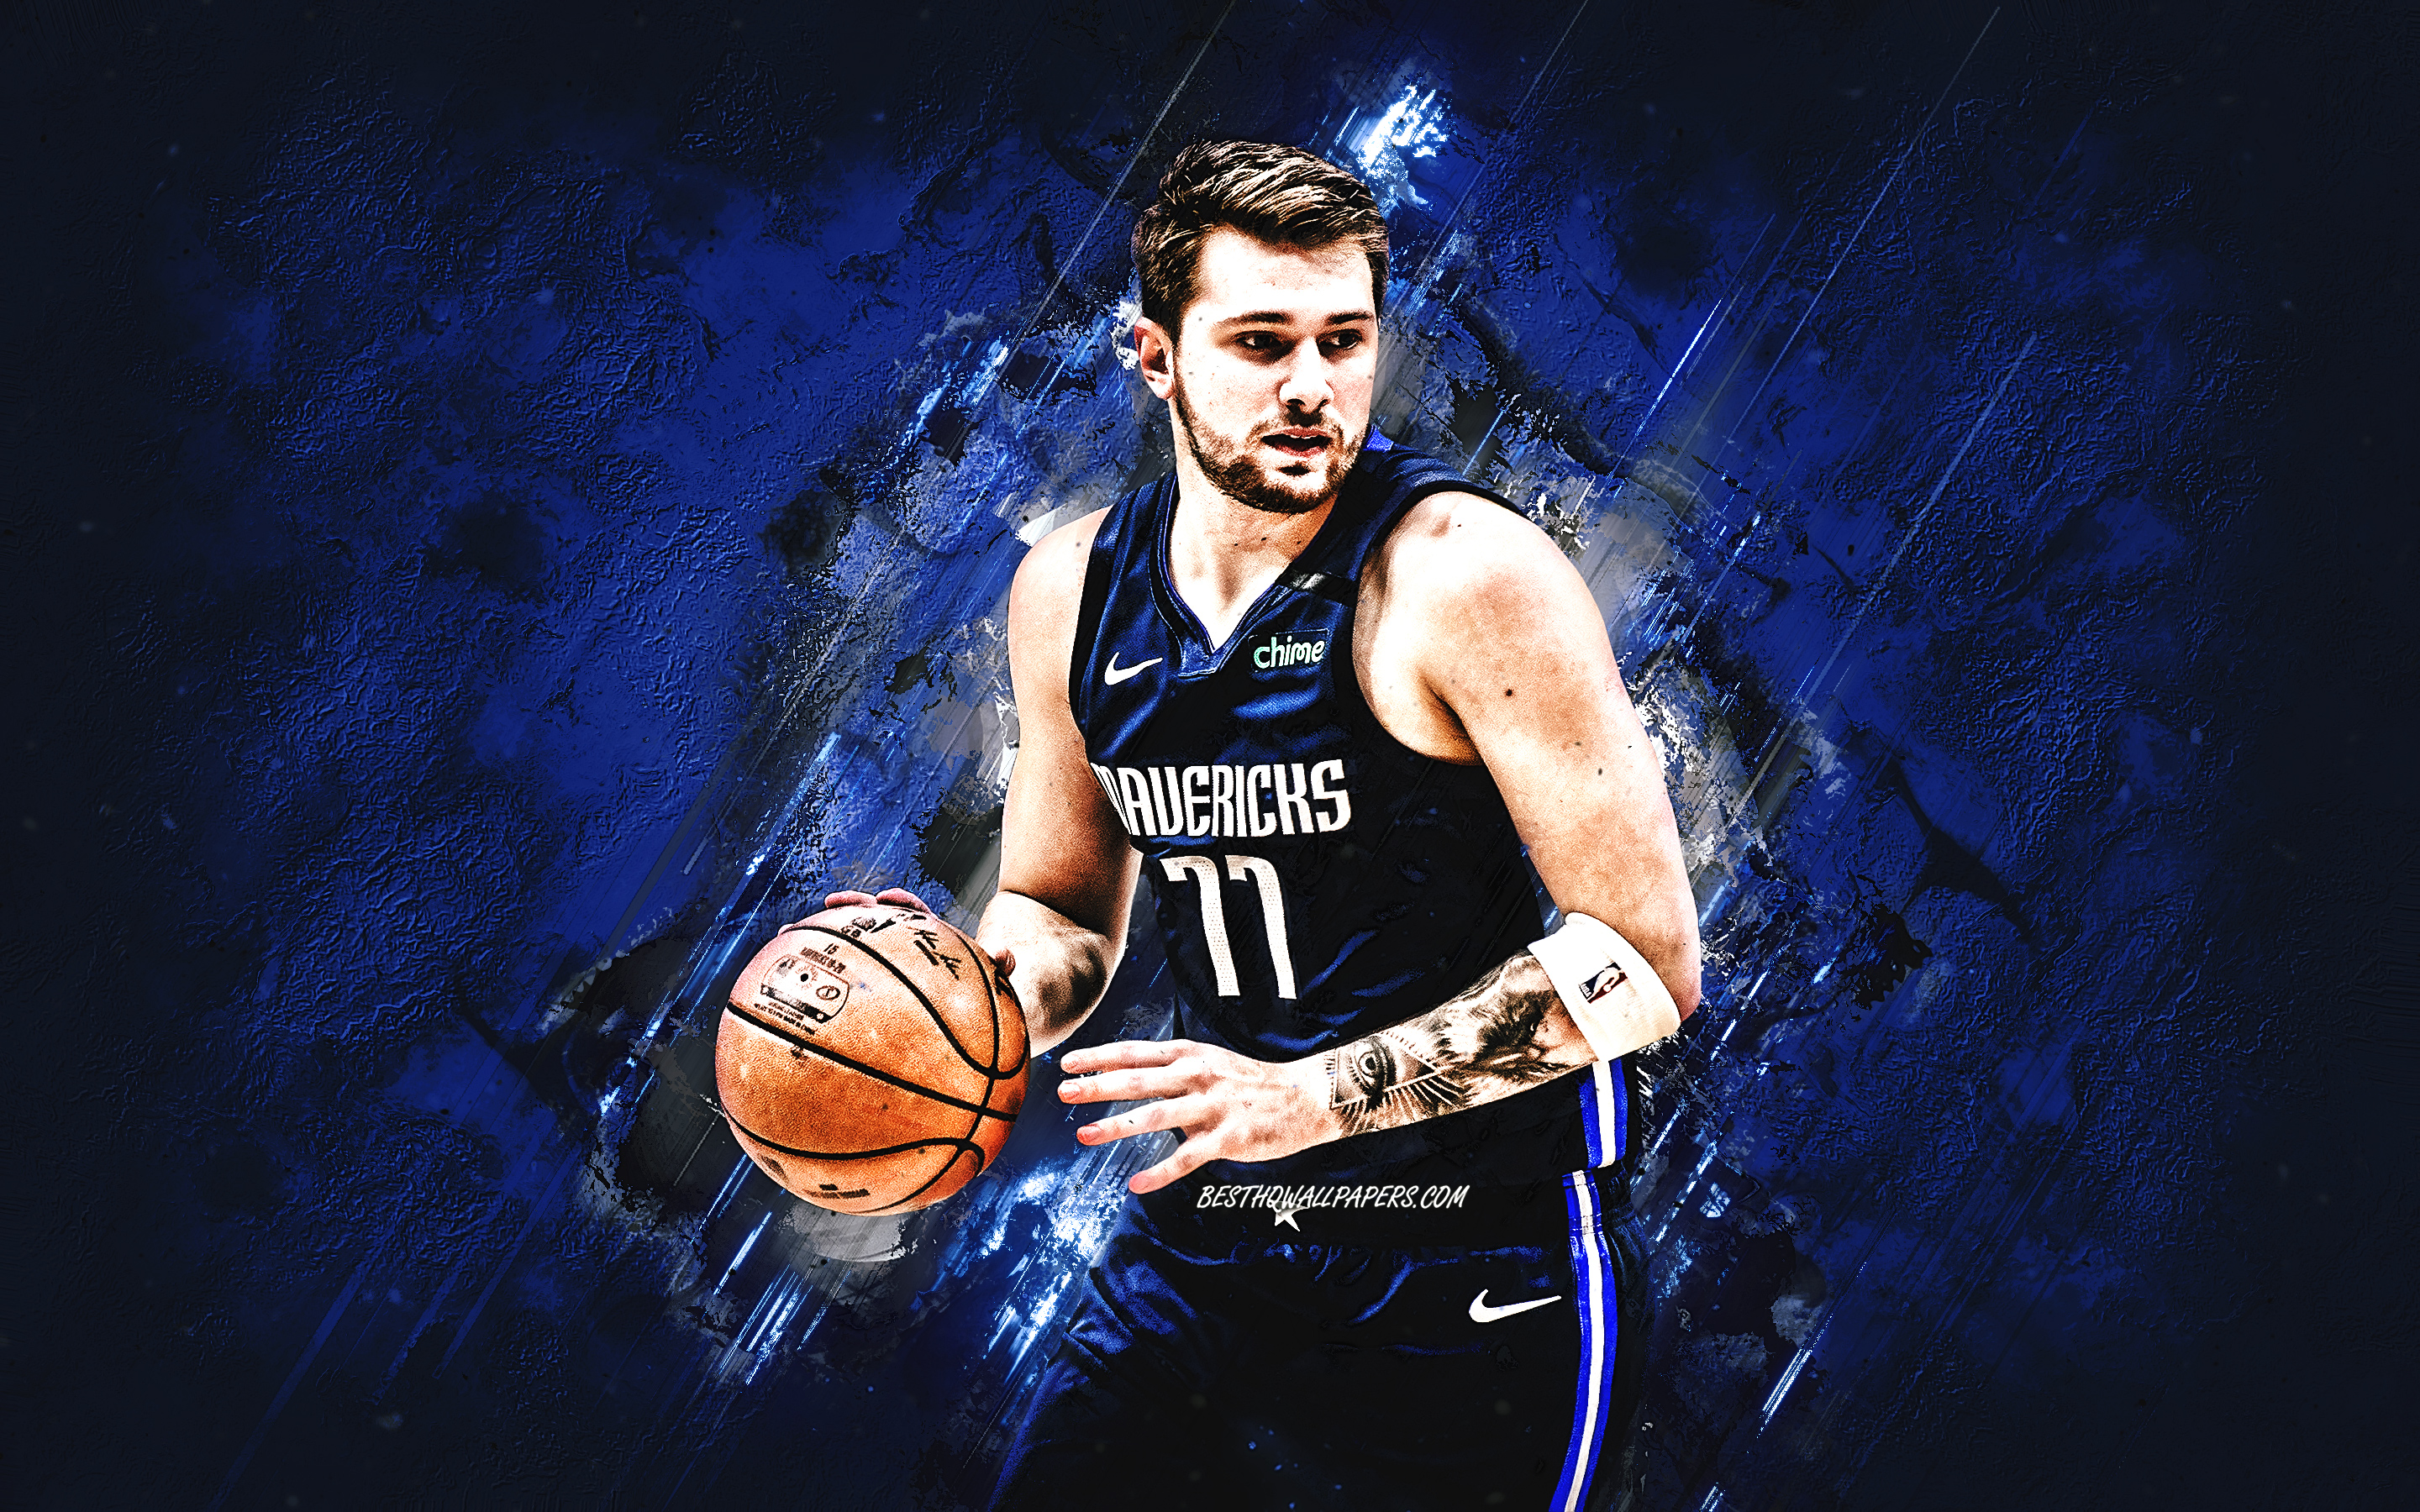 Download wallpaper Luka Doncic, Dallas Mavericks, NBA, Slovenian basketball player, blue stone background, USA, basketball for desktop with resolution 2880x1800. High Quality HD picture wallpaper